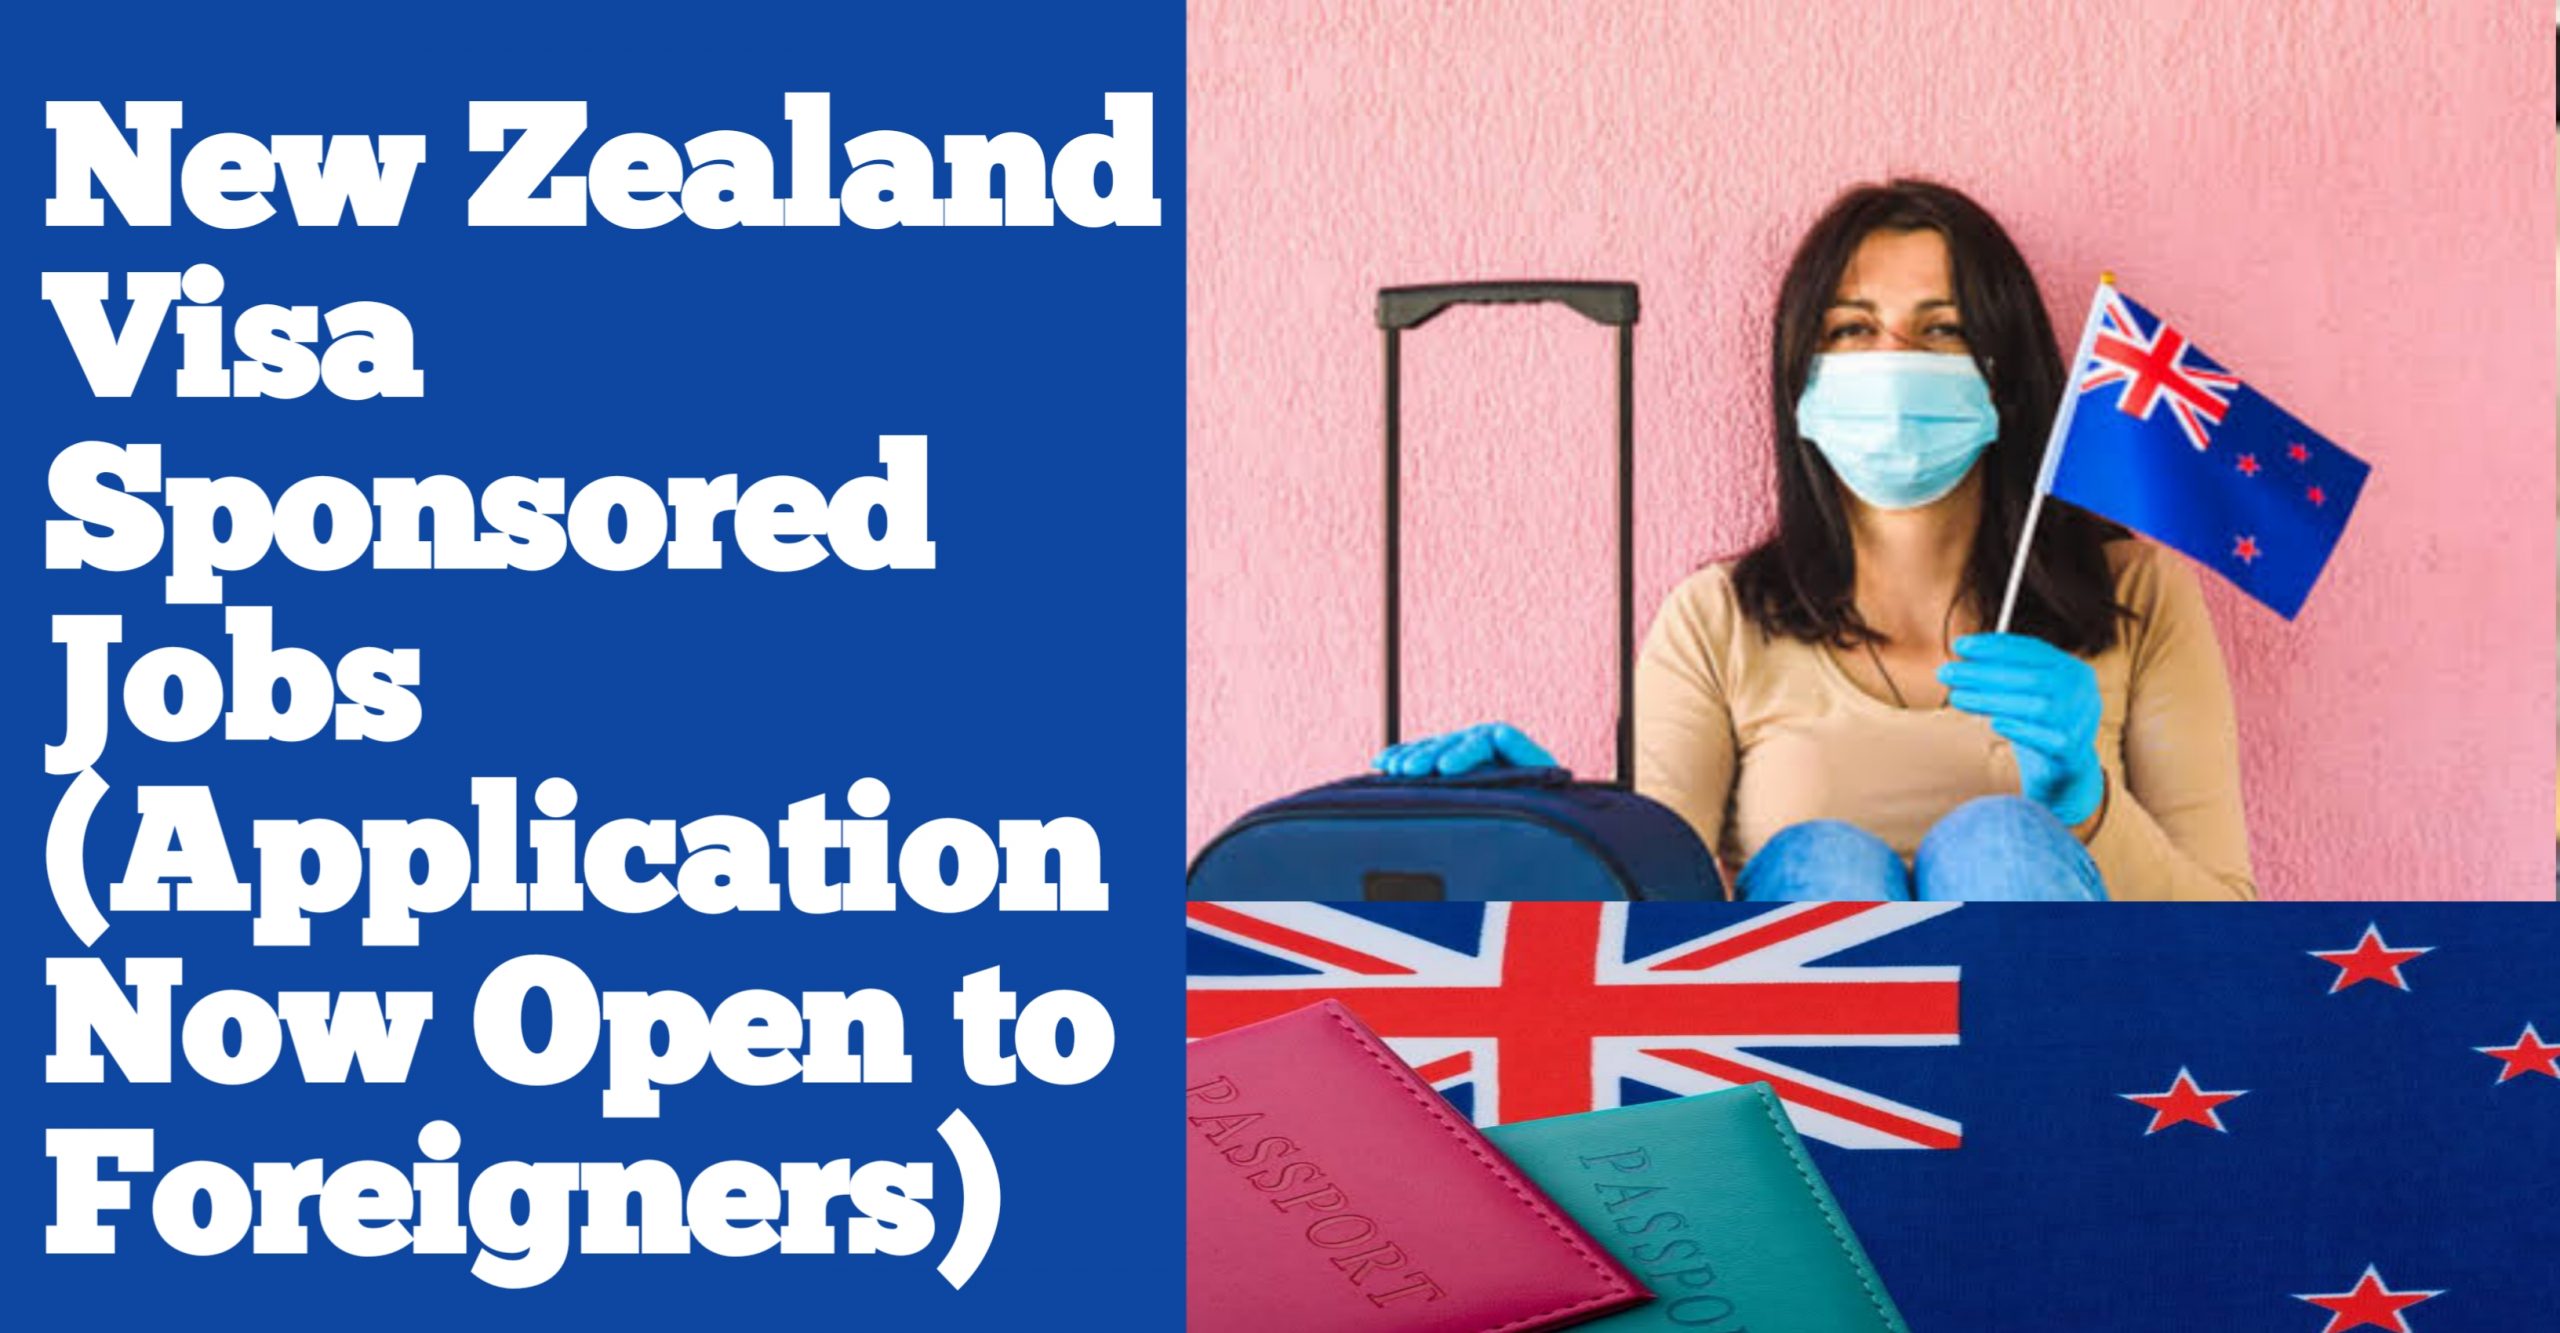 New Zealand Visa Sponsored Jobs Application Open To Foreigners Career Opportunities 1568